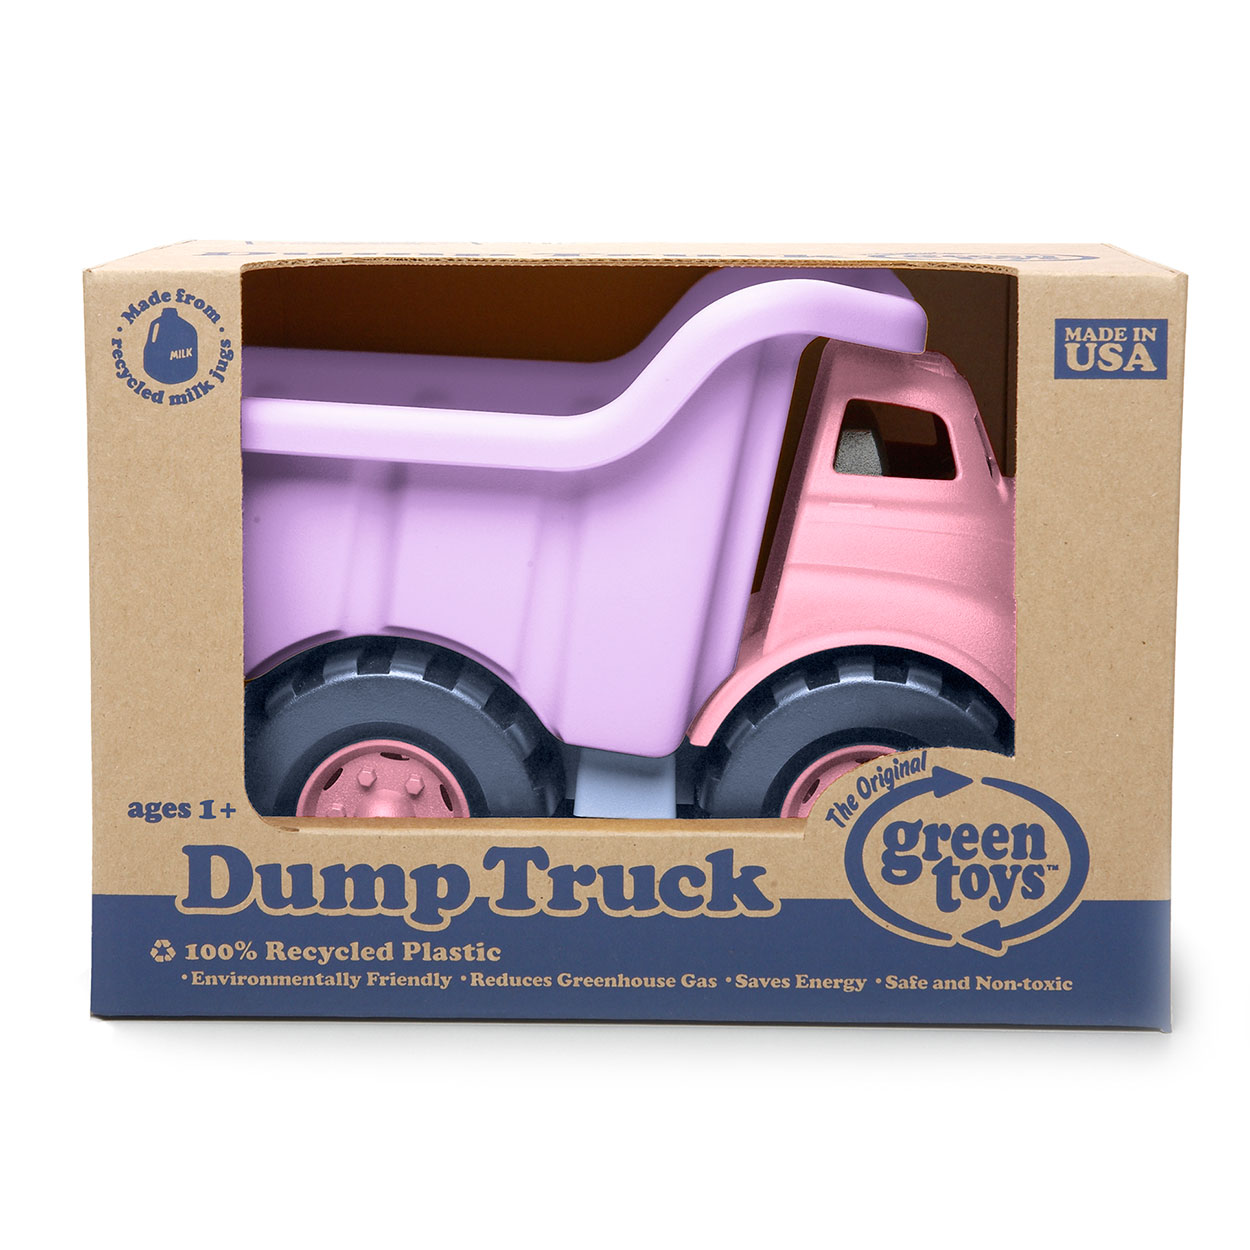 Green Toys Camion Benne Rose